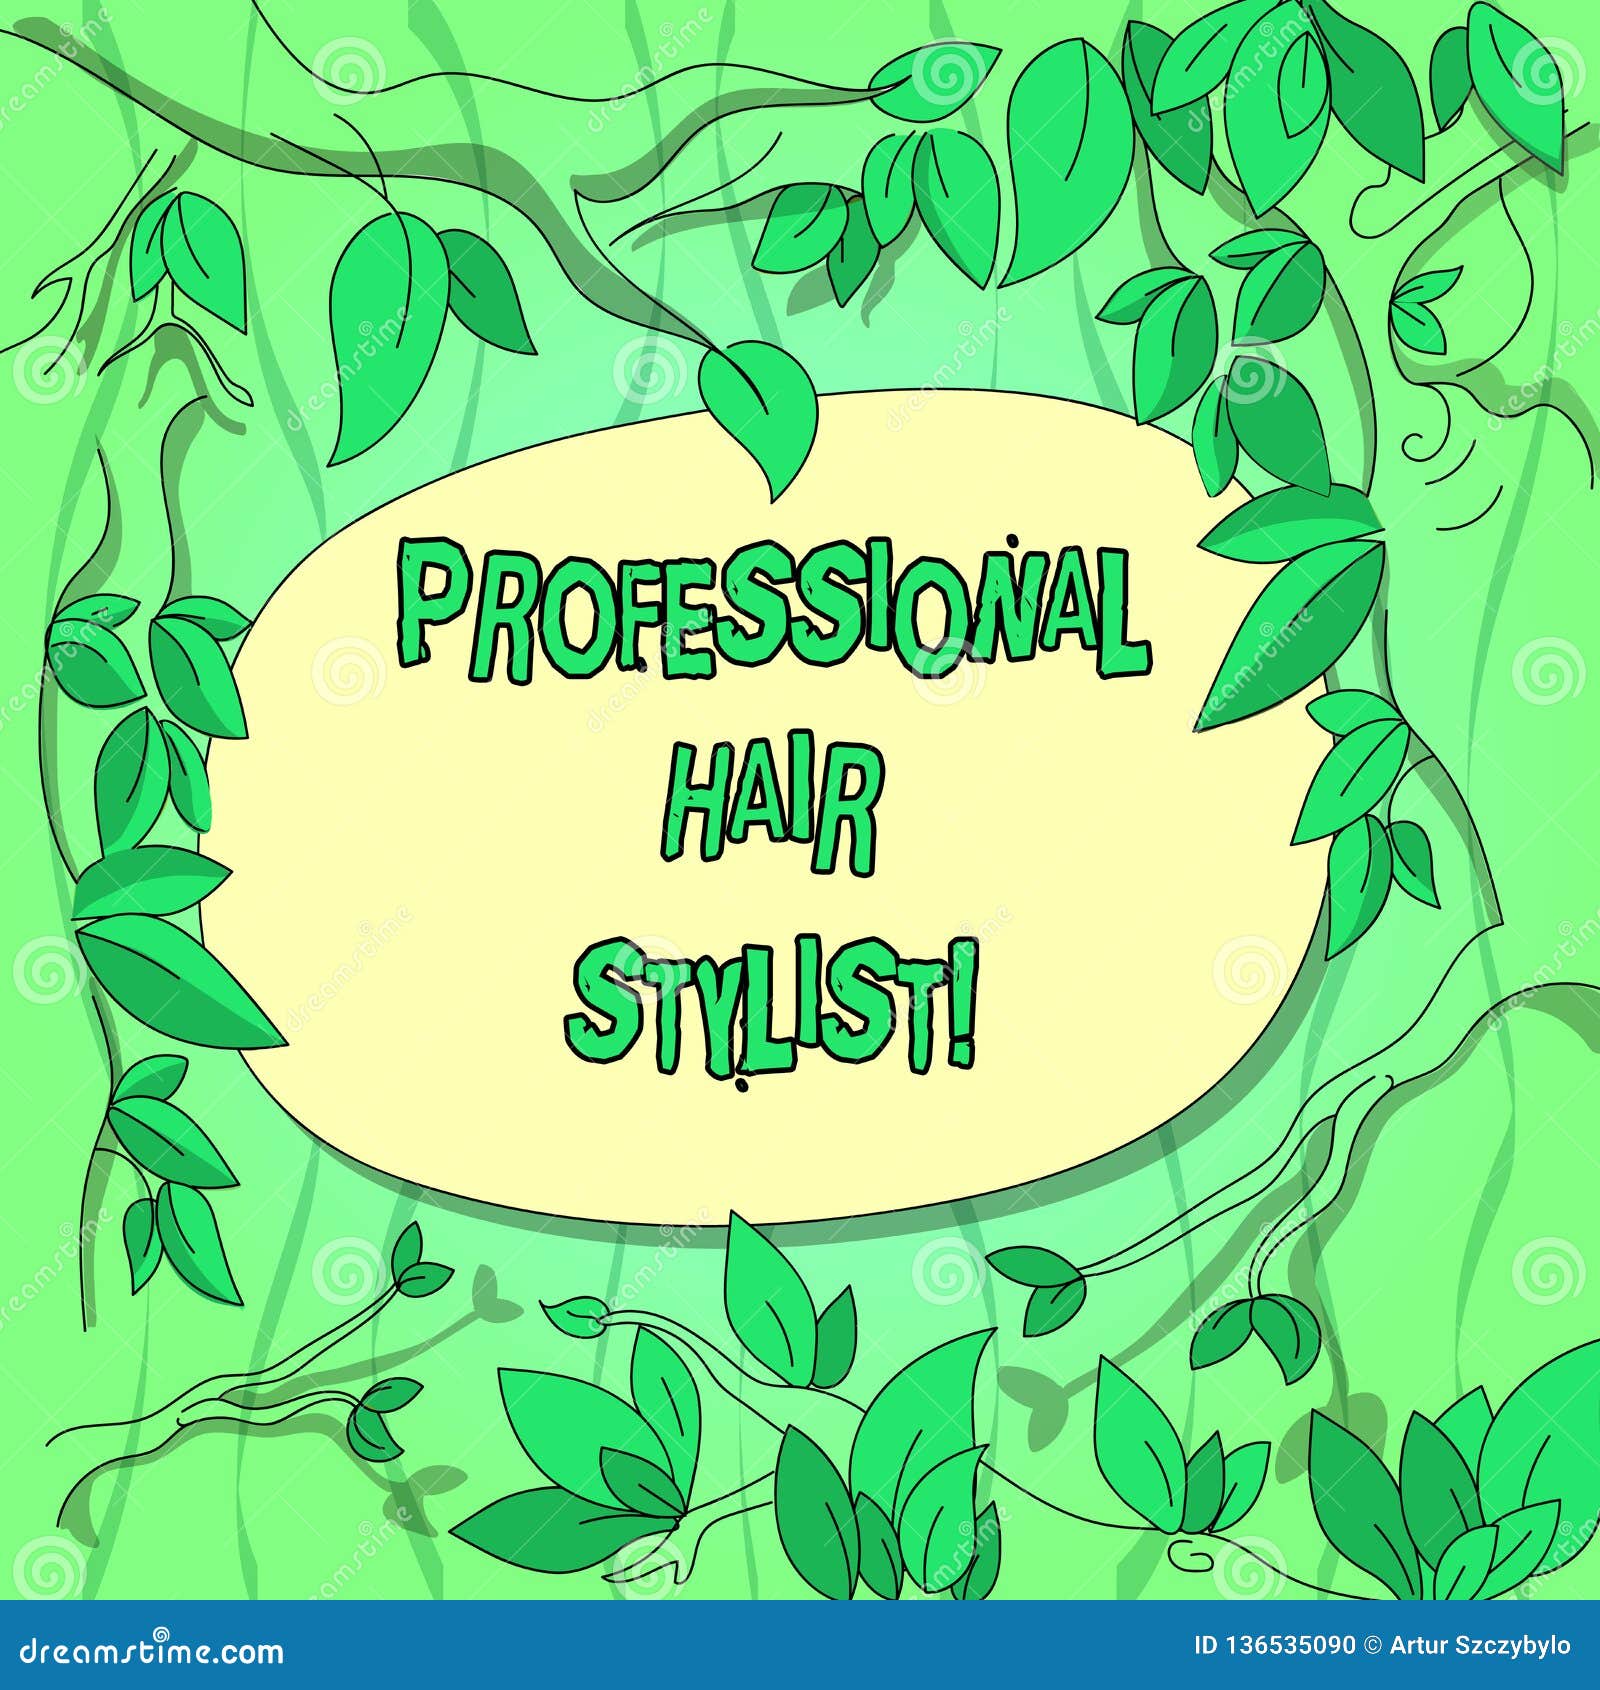 Buy Hairstylist Gift Hairstylist Definition Hairstylist Gifts Online in  India  Etsy